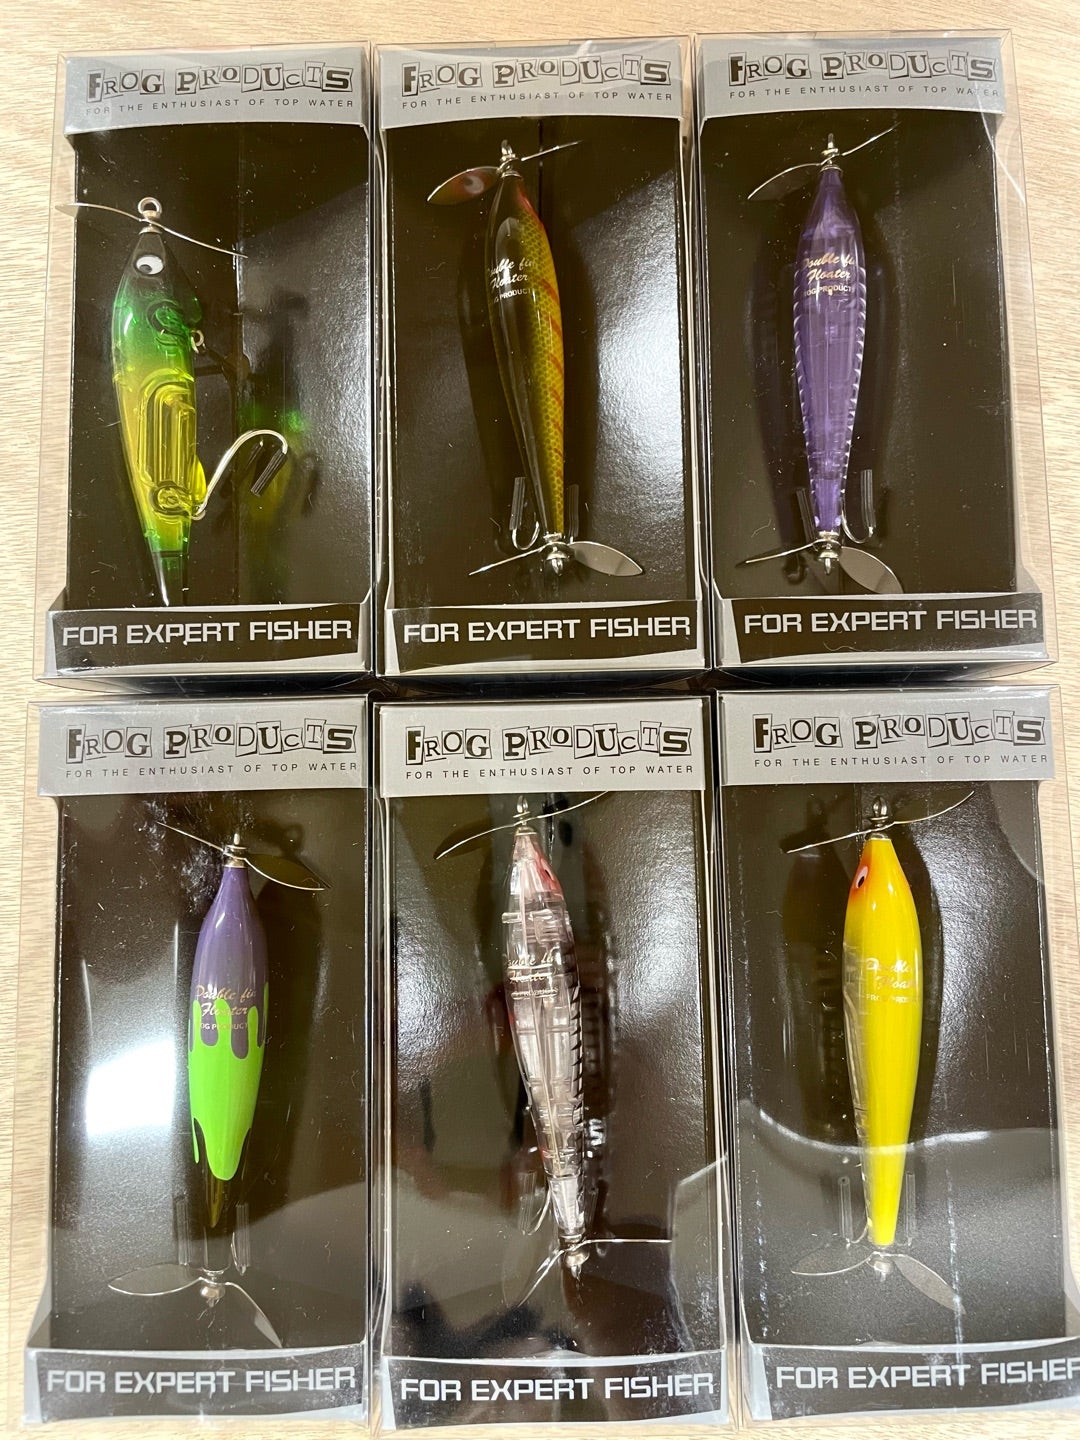 FROG PRODUCT FOR EXPERT FISHER ルアー 時間とお金どちらが大事